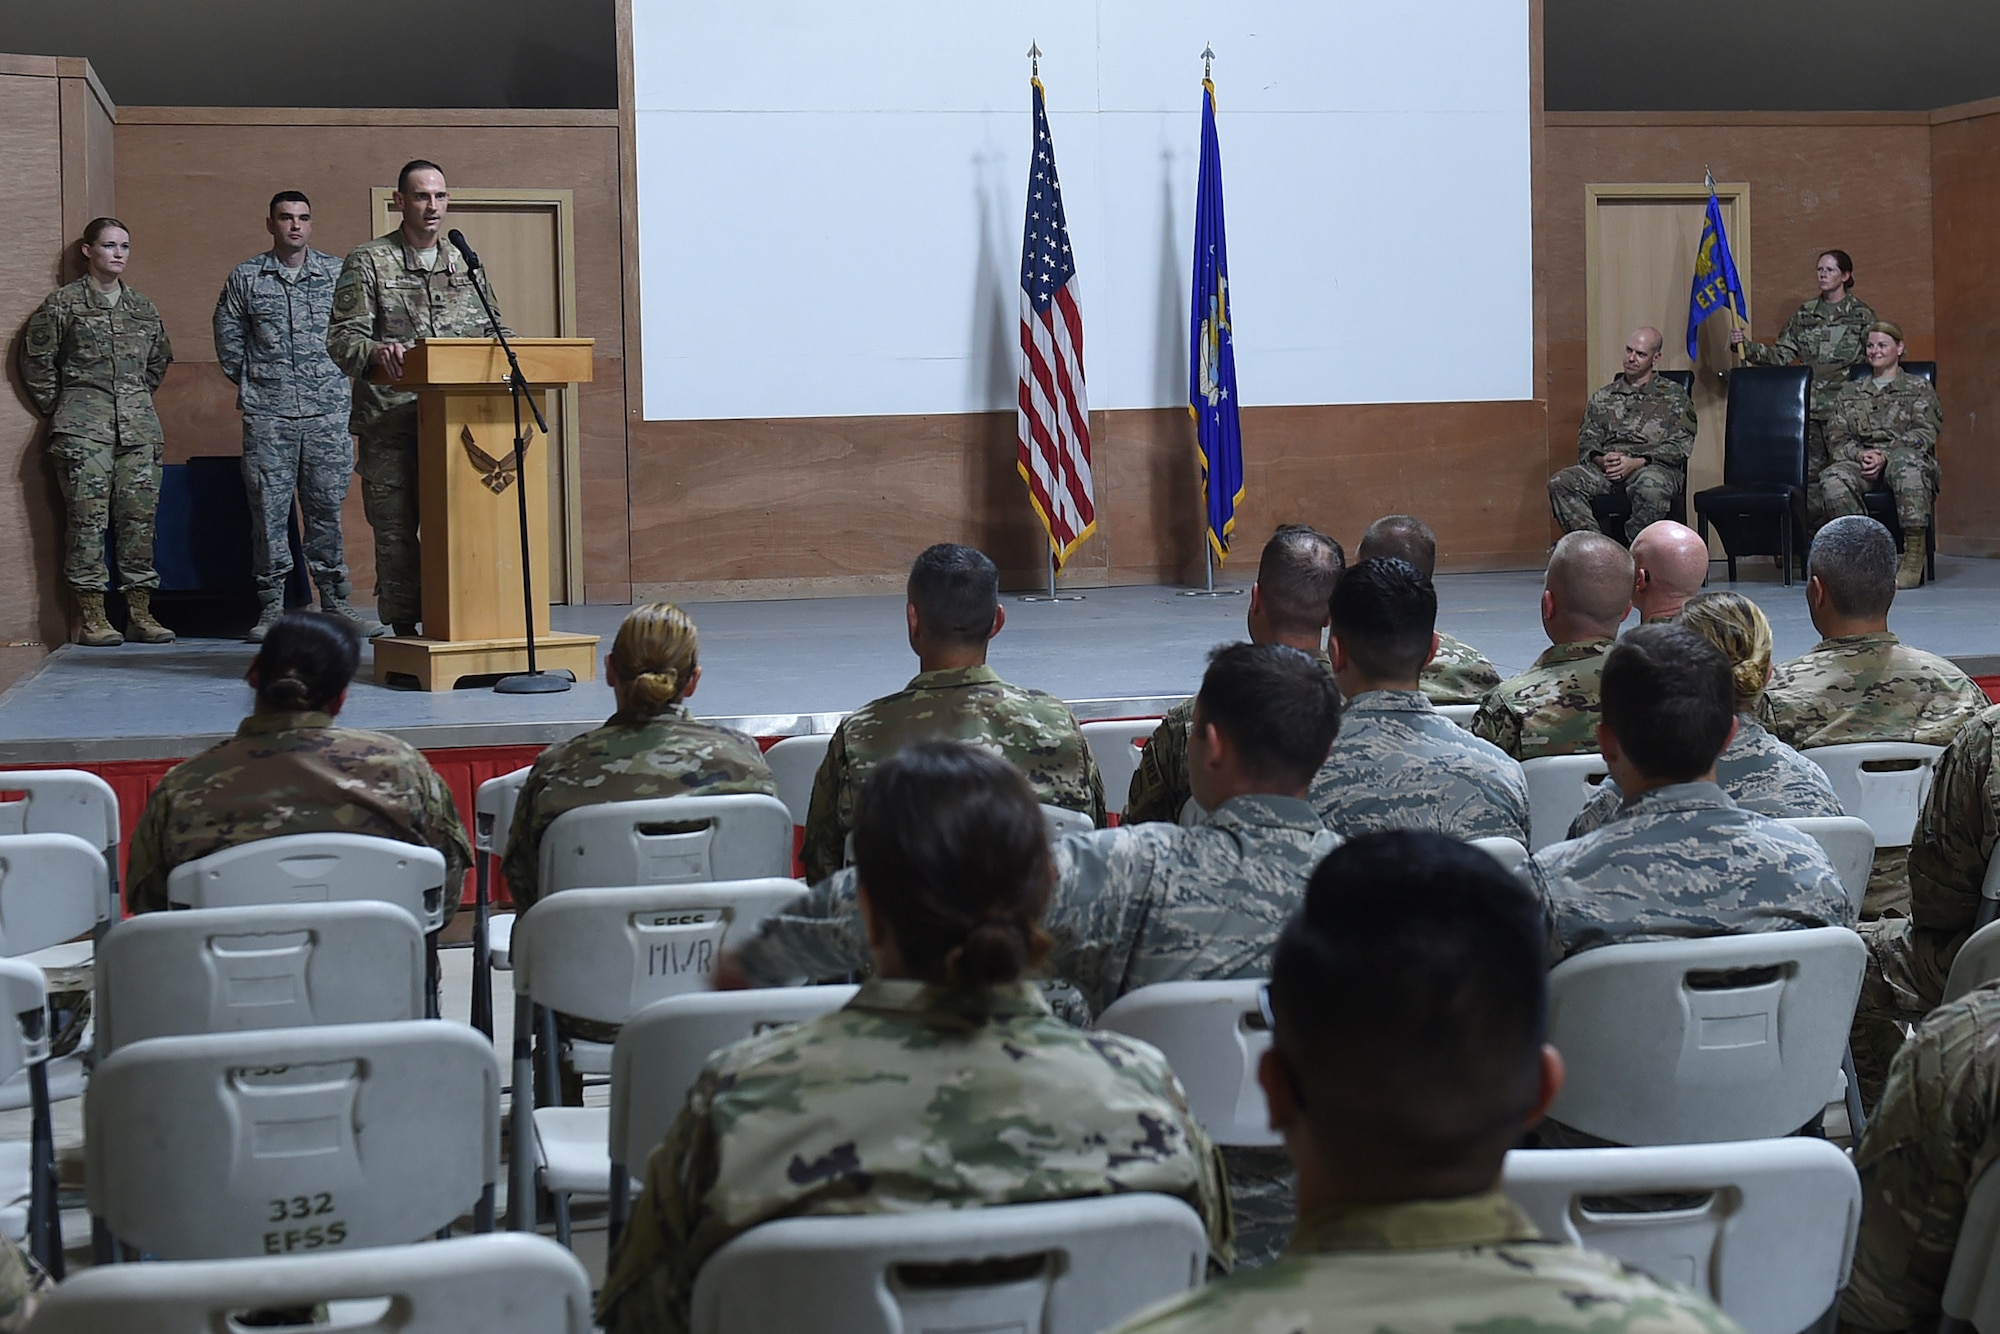 An Airman stands behind a podium to speak to an audience